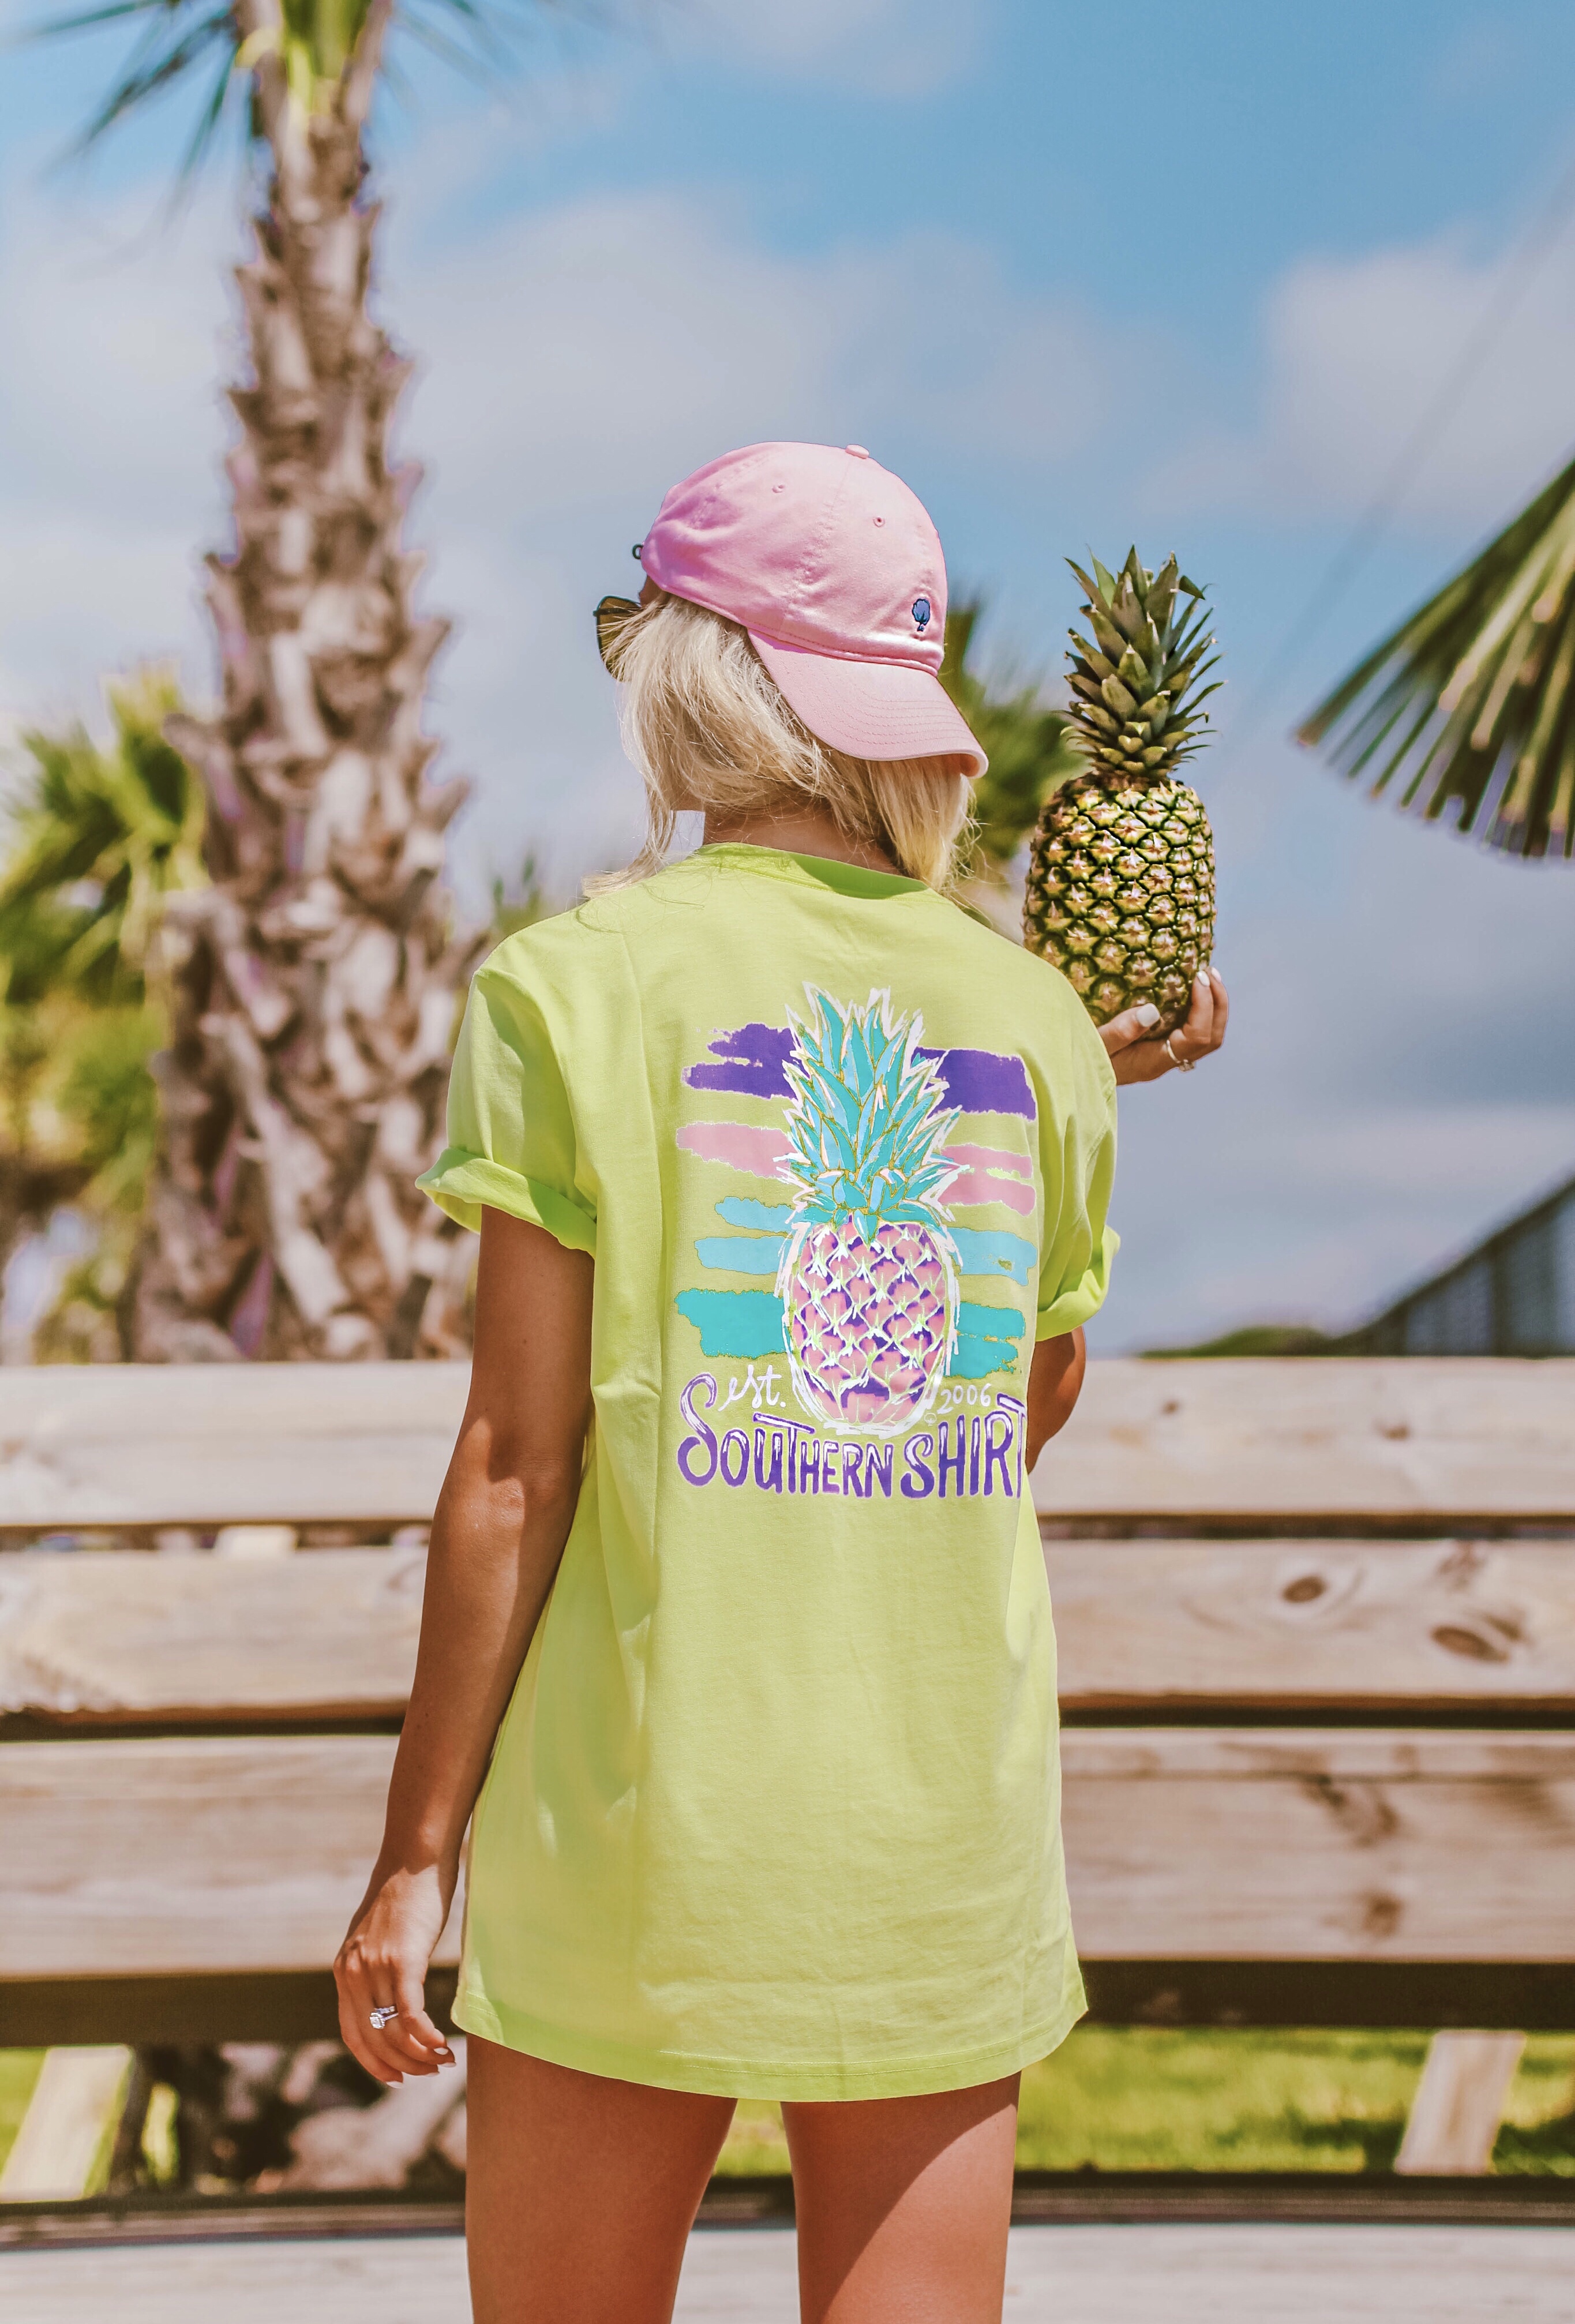 Summer Staples with Southern Shirt | www.lovenlabels.com